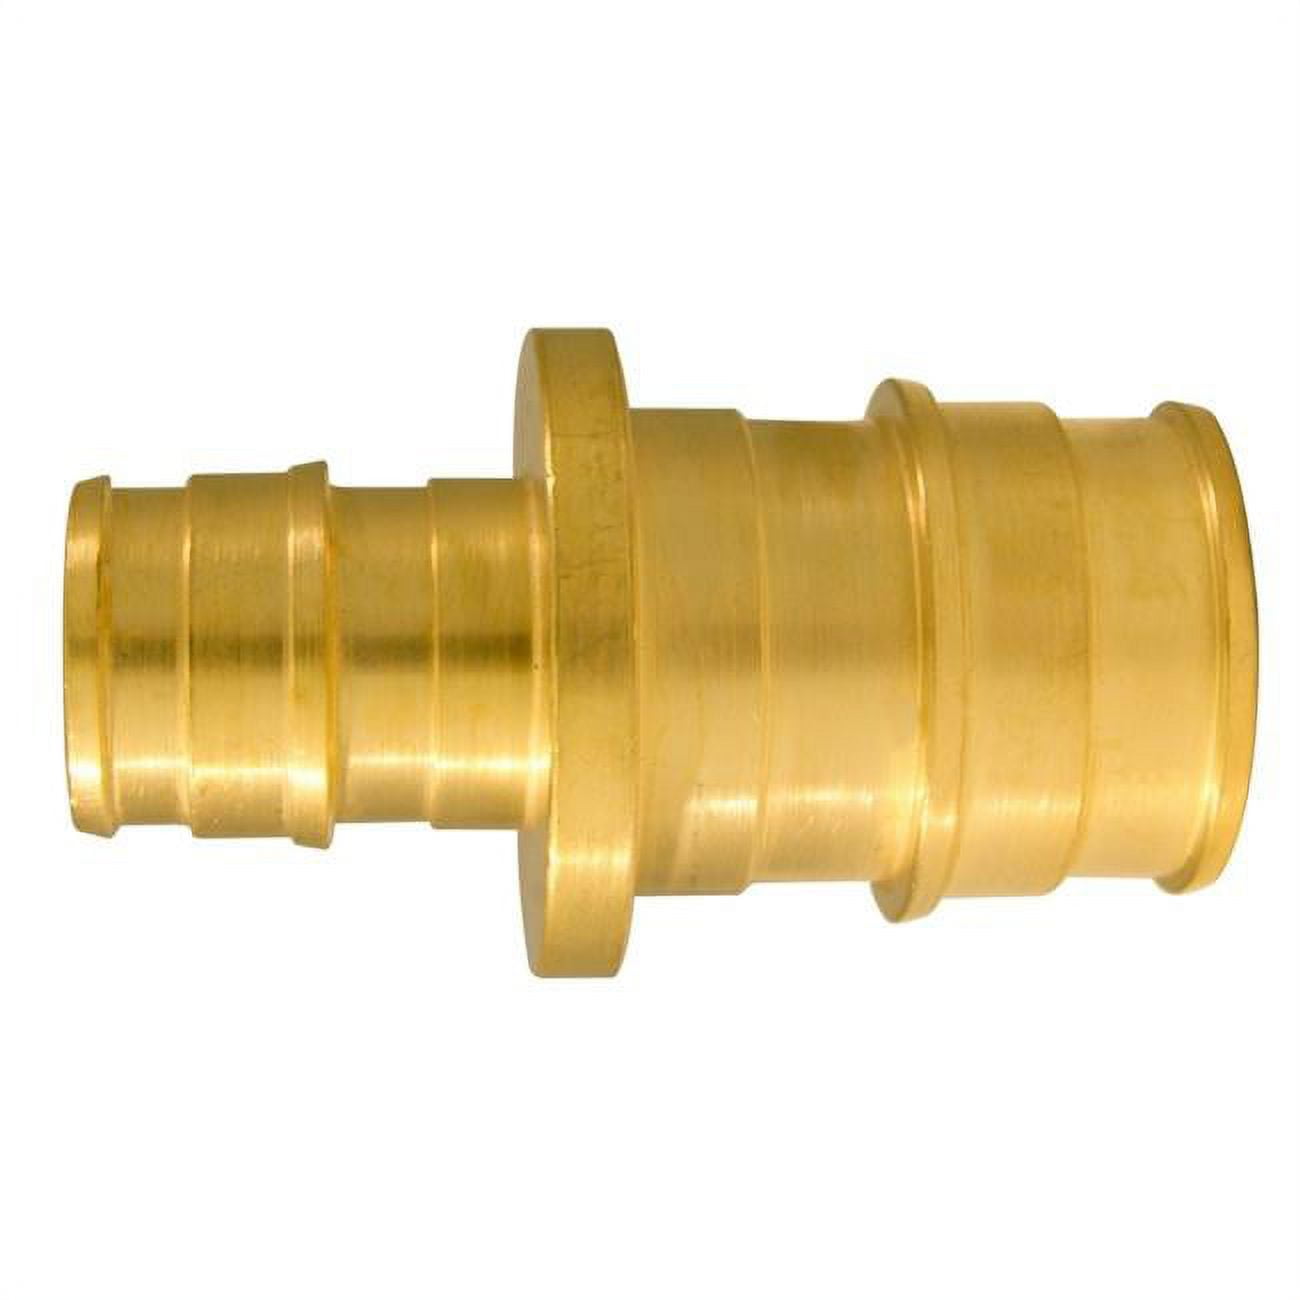 Picture of Apollo 4007397 0.5 x 0.75 in. Barb Brass Straight Coupling - Pack of 25